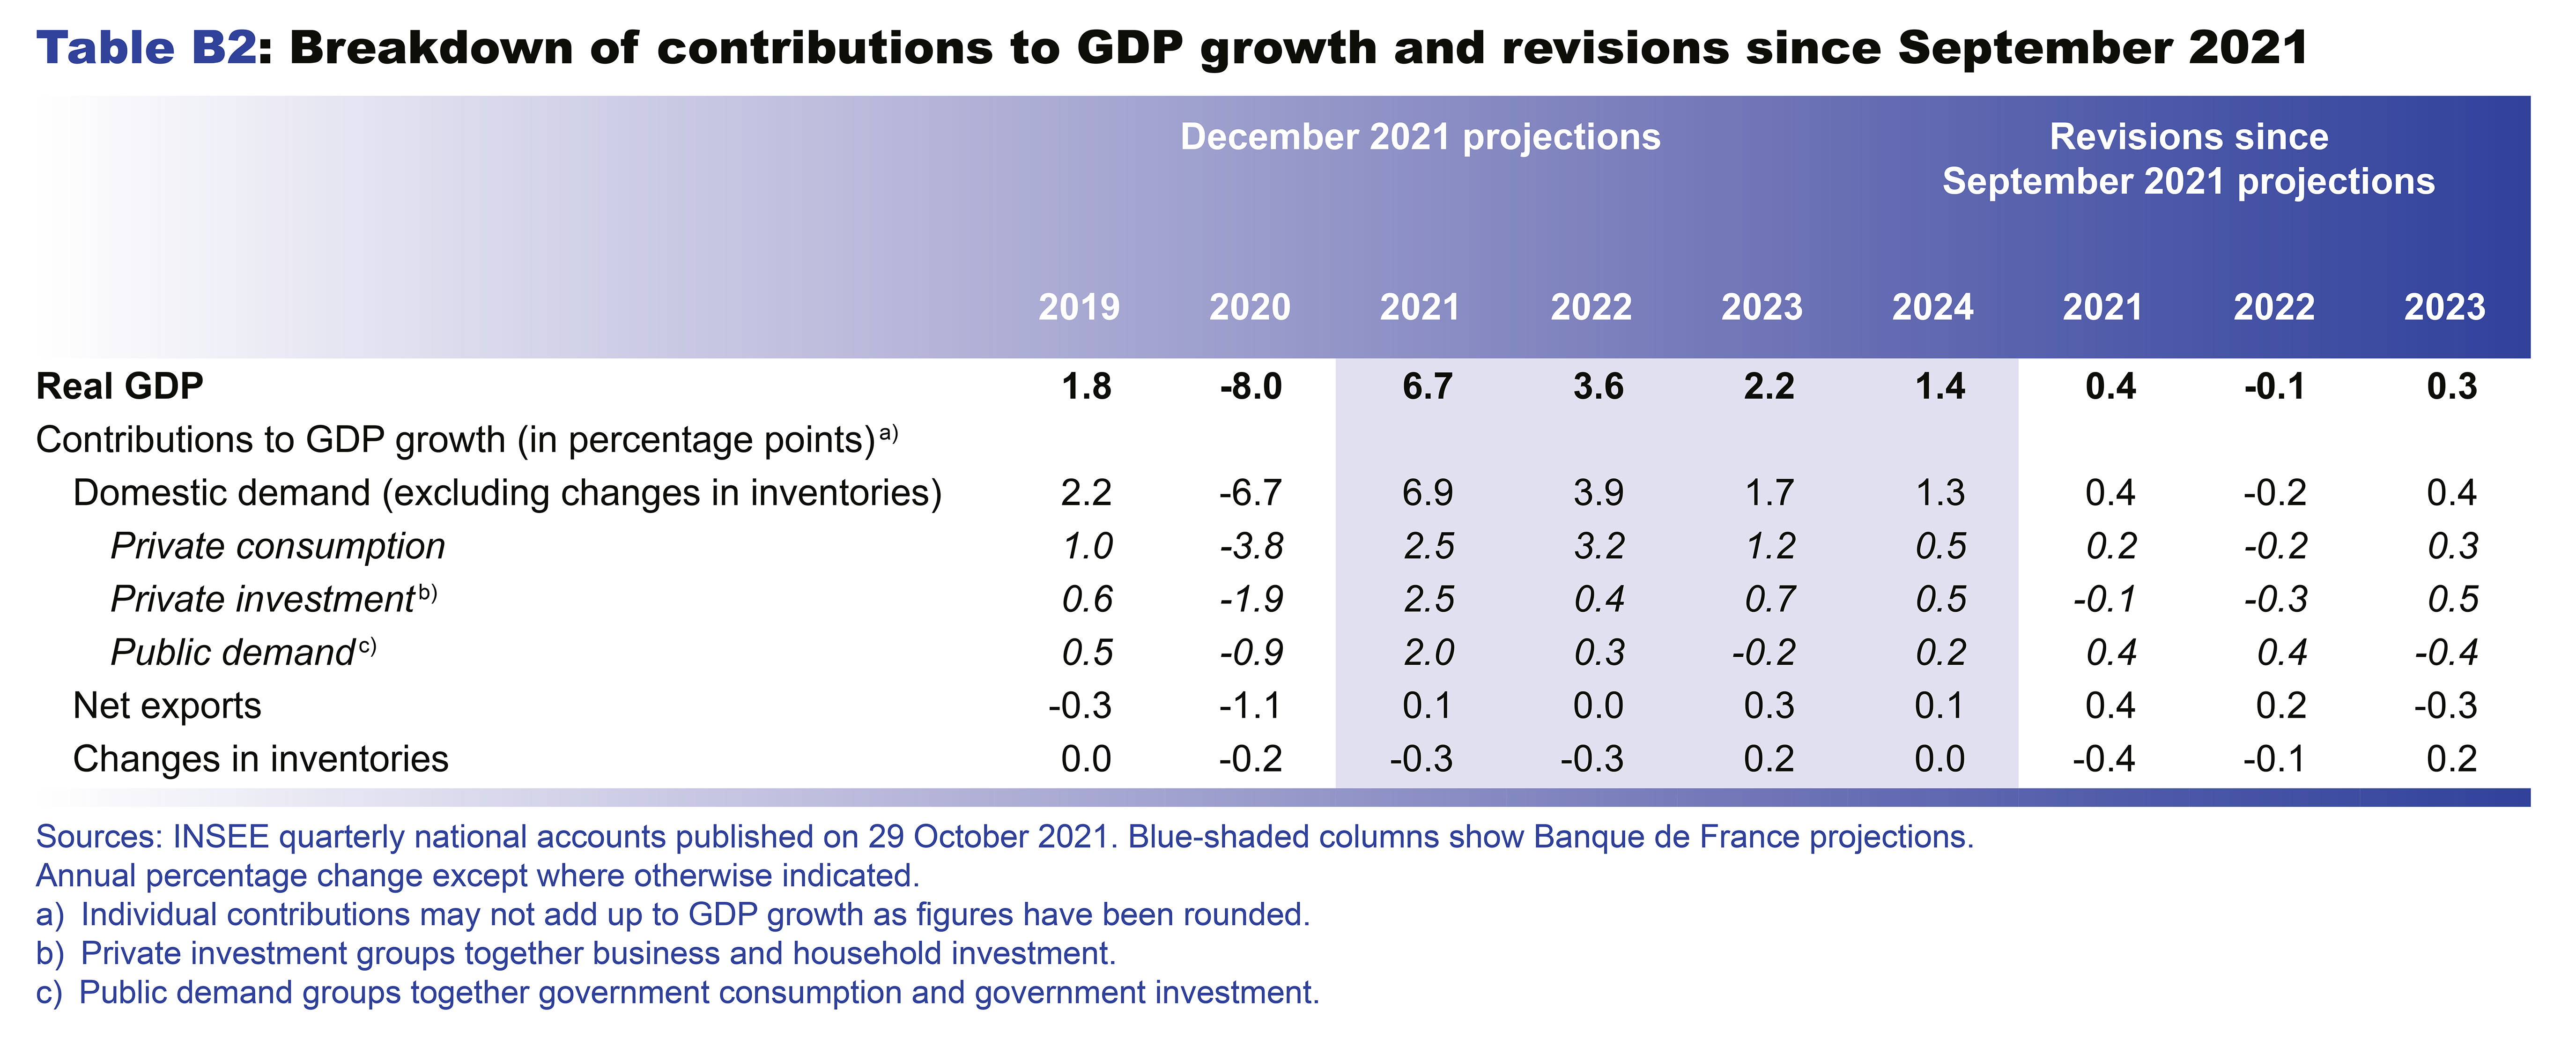 Macroeconomic projections – December 2021 - Breakdown of contributions to GDP growth and revisions since september 2021